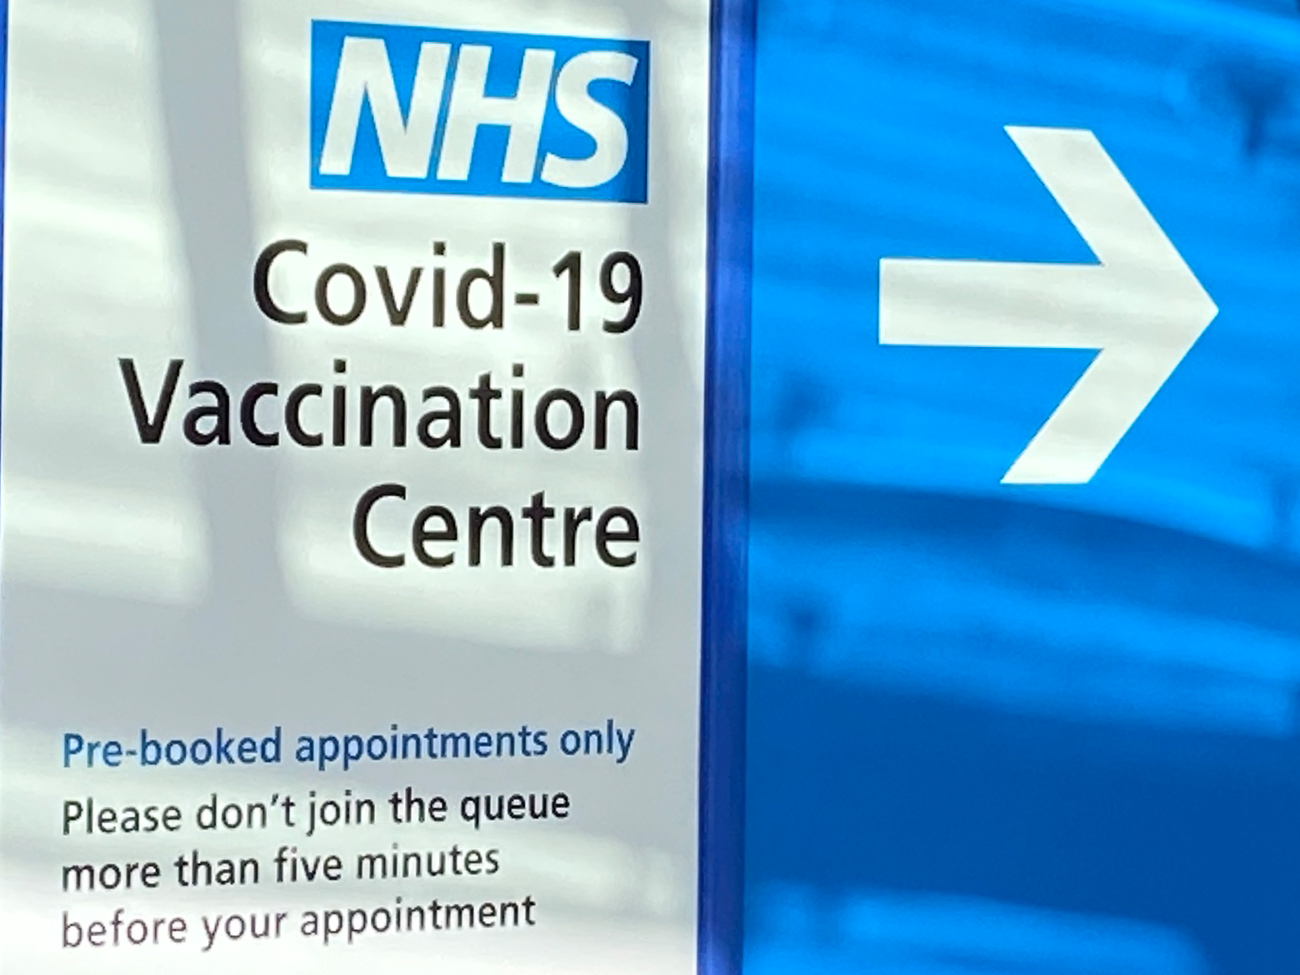 NHS Vaccination Centre wayfinding